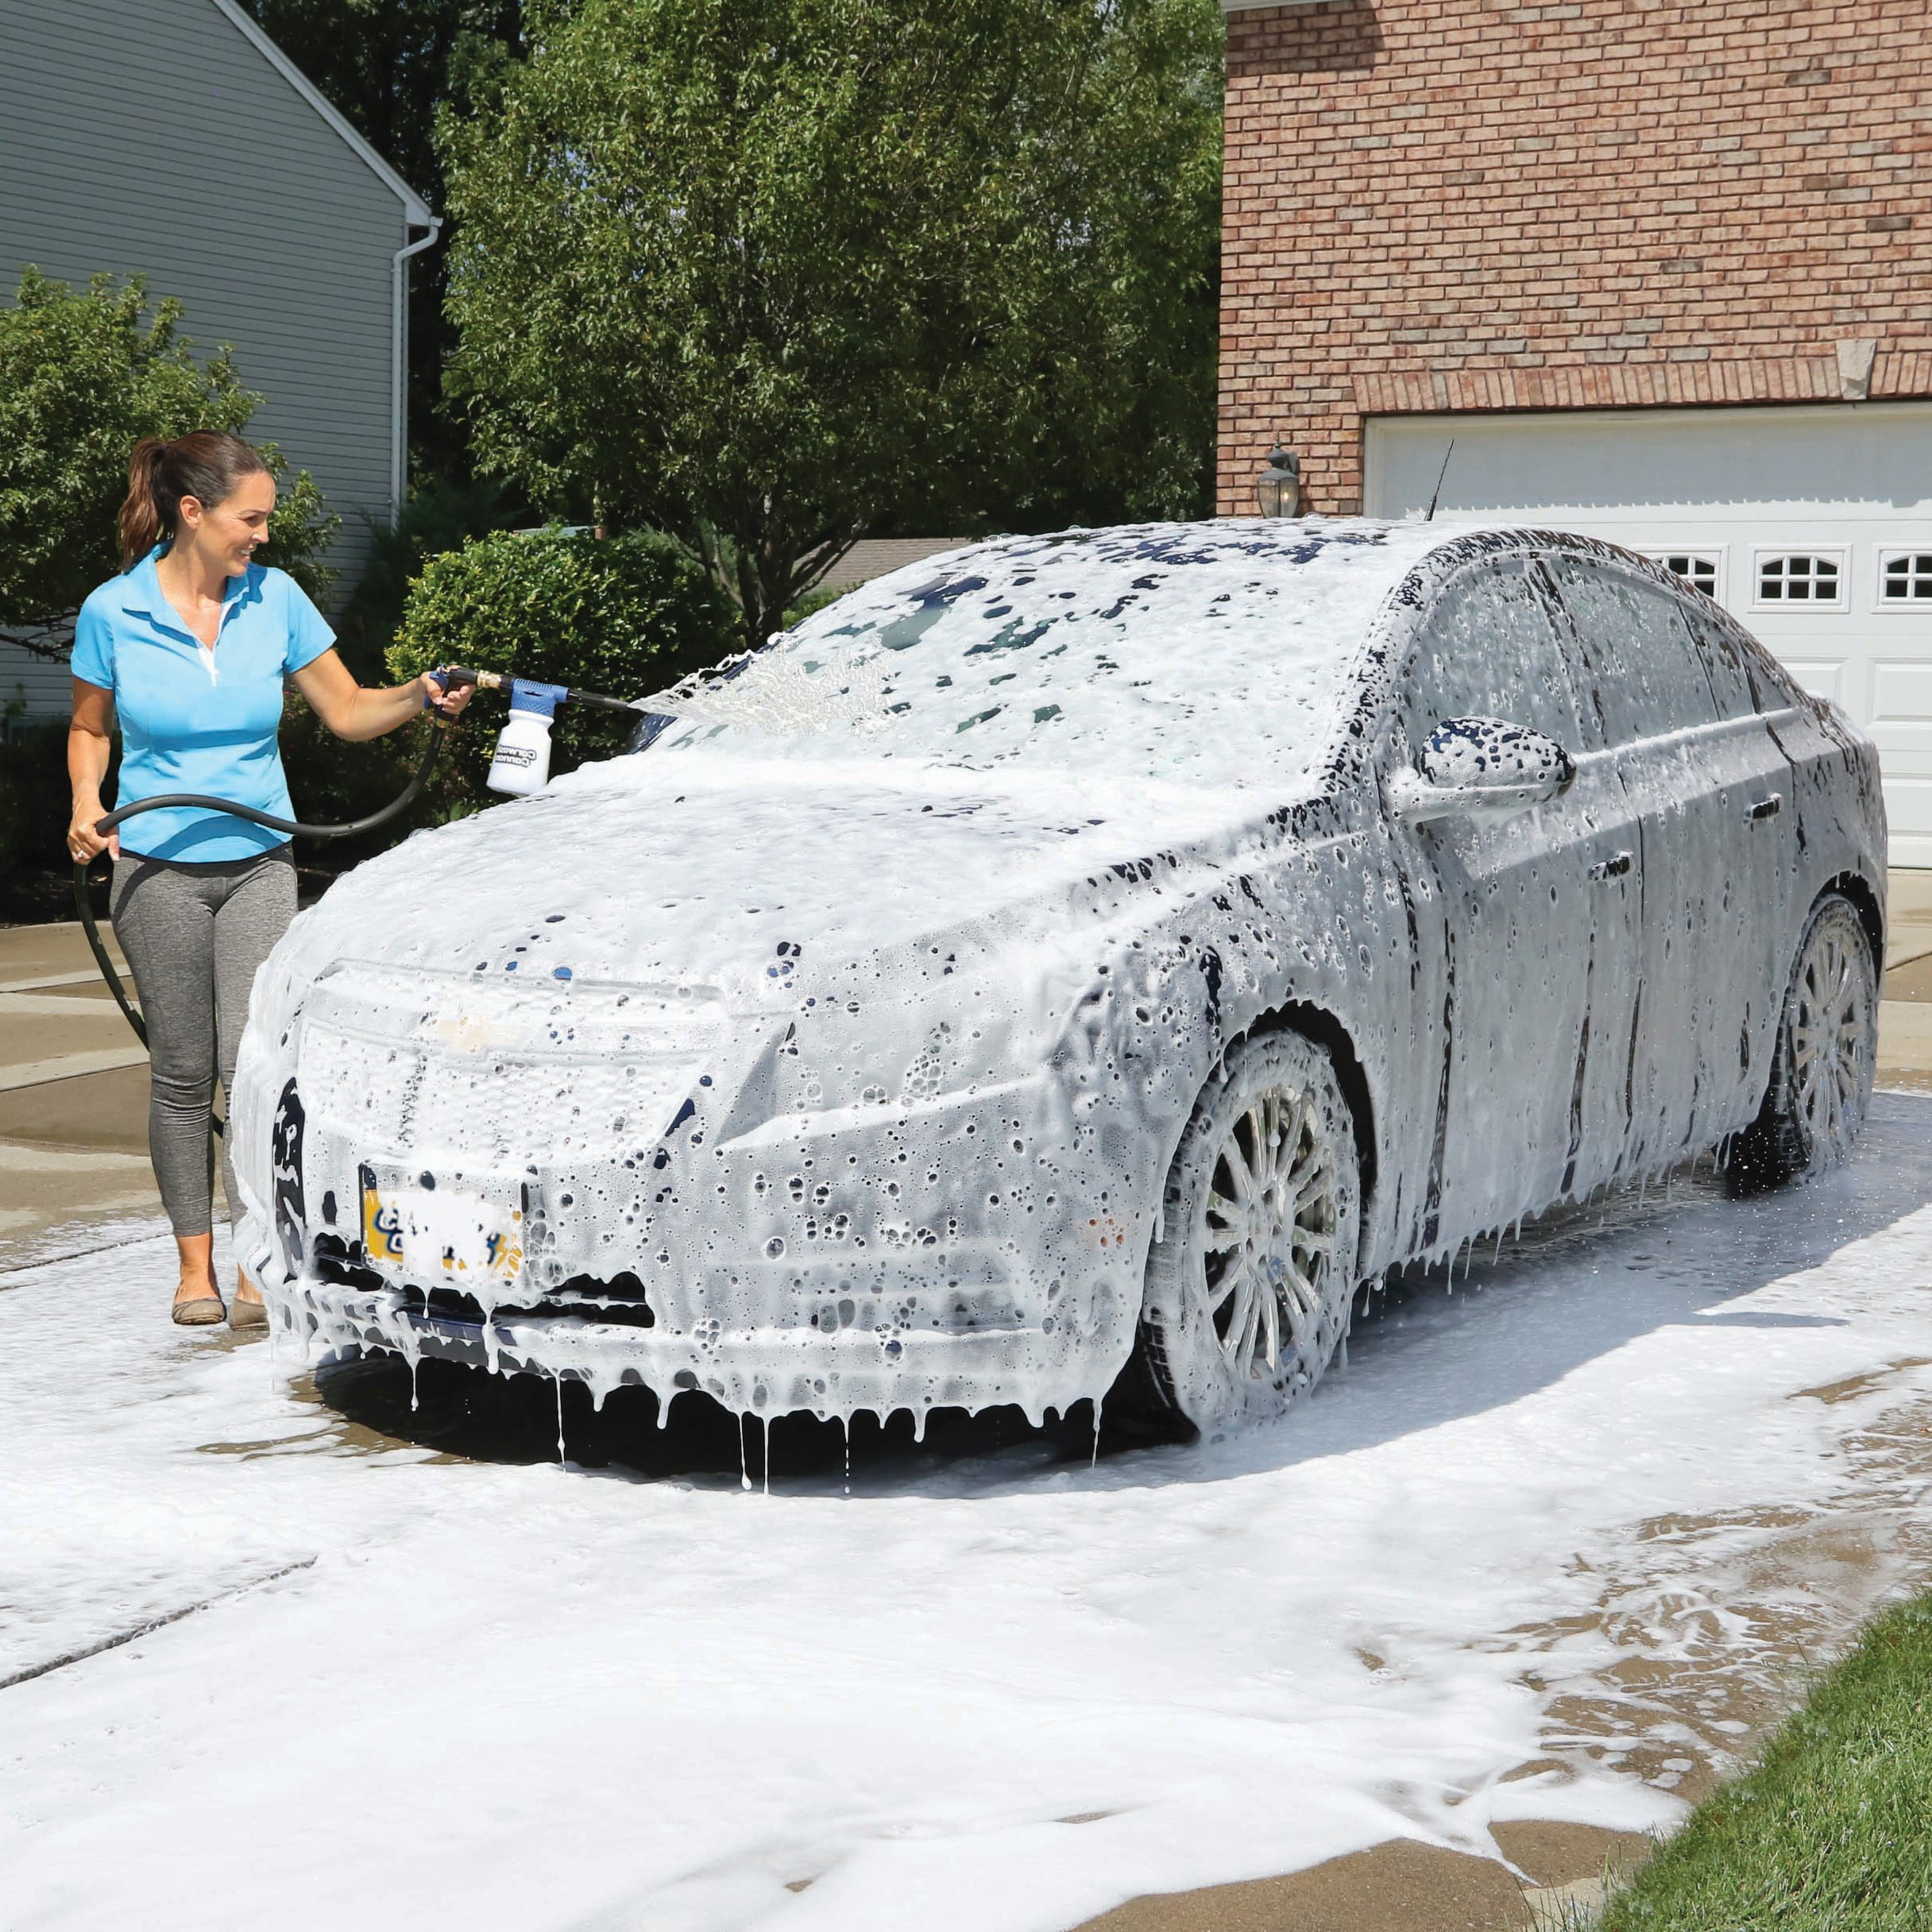 Flash Freaky Foam Touchless Foam Cannon Soap - Flash Auto Detailing Products